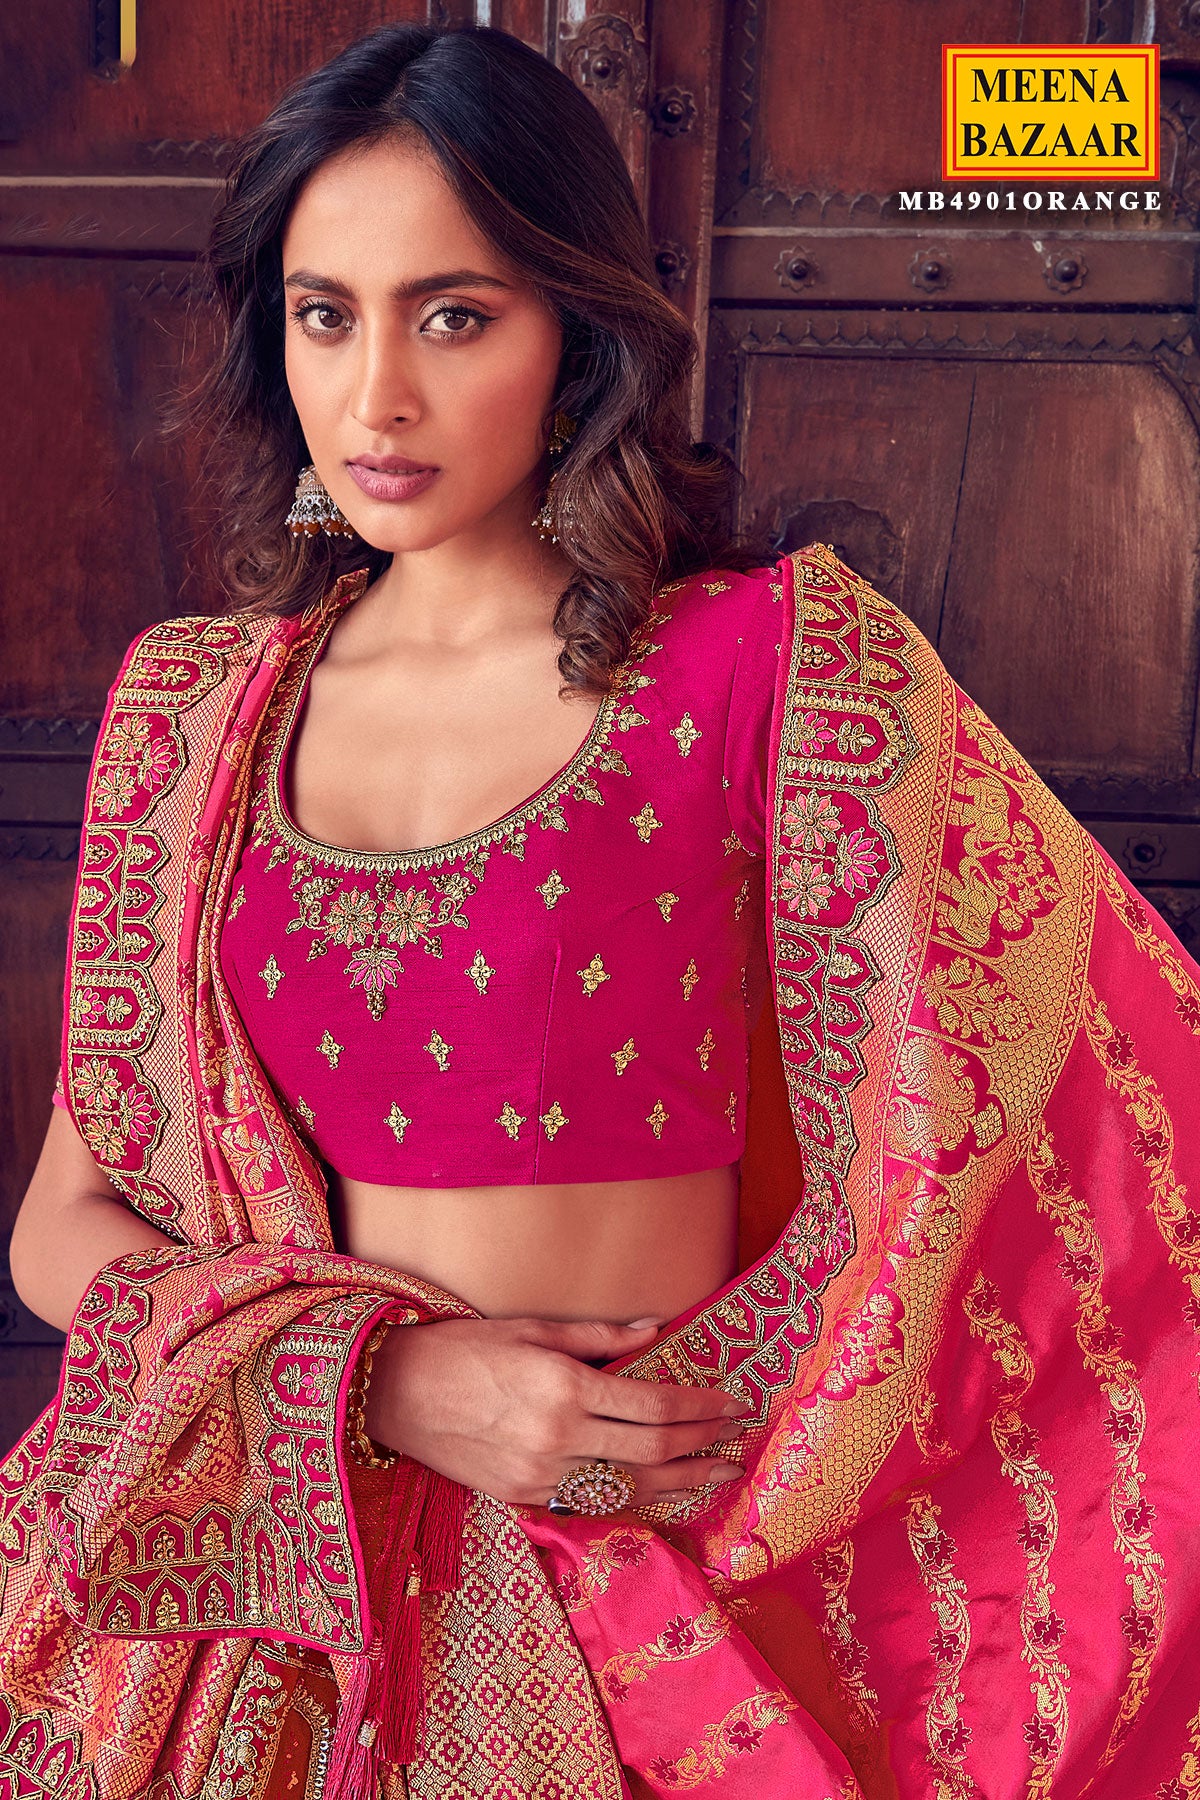 Meena Bazaar - Lehenga Saree with Net Ghera and Georgette Embroidery pallu  at BigIndianWedding.Com | Indian bridal wear, Indian attire, Indian outfits